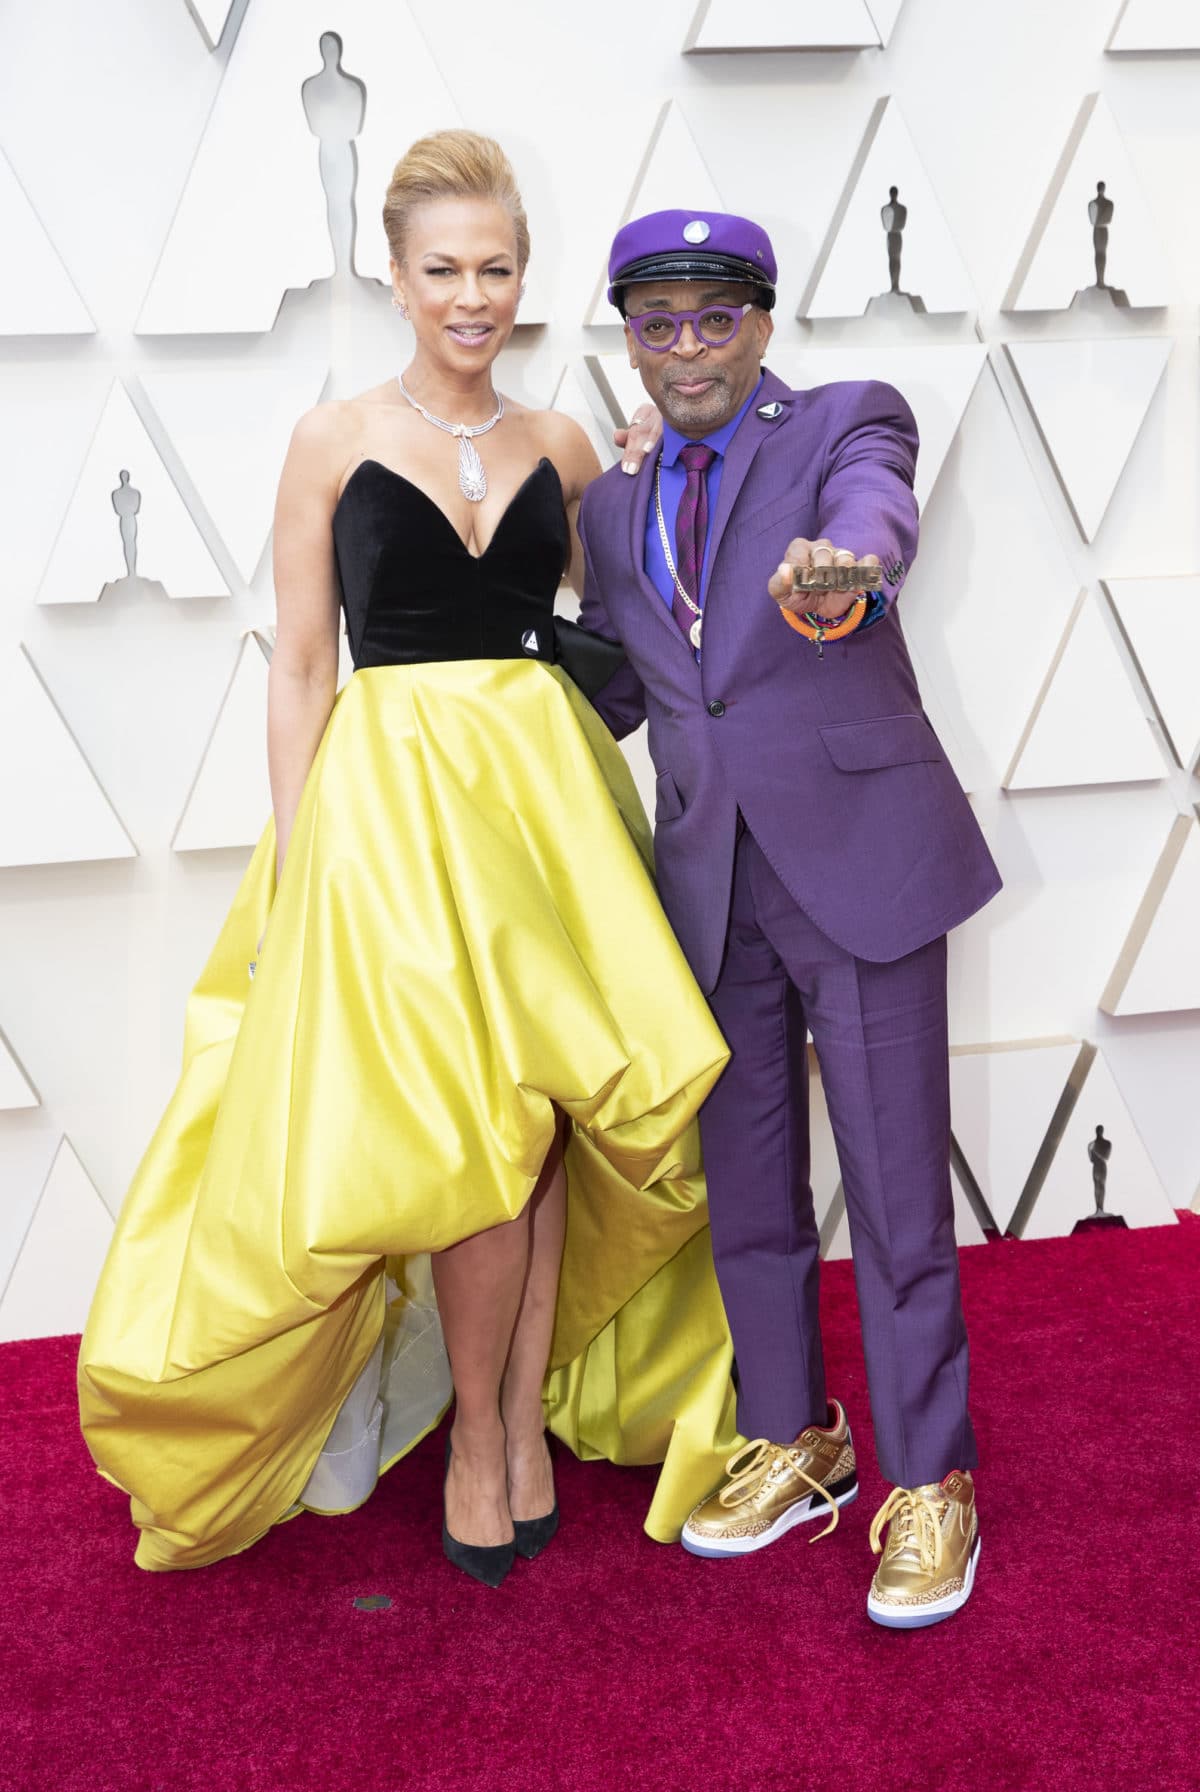 Can You Feel The Love? See Your Favorite Couples Shining On The Oscars 2019 Red Carpet ...